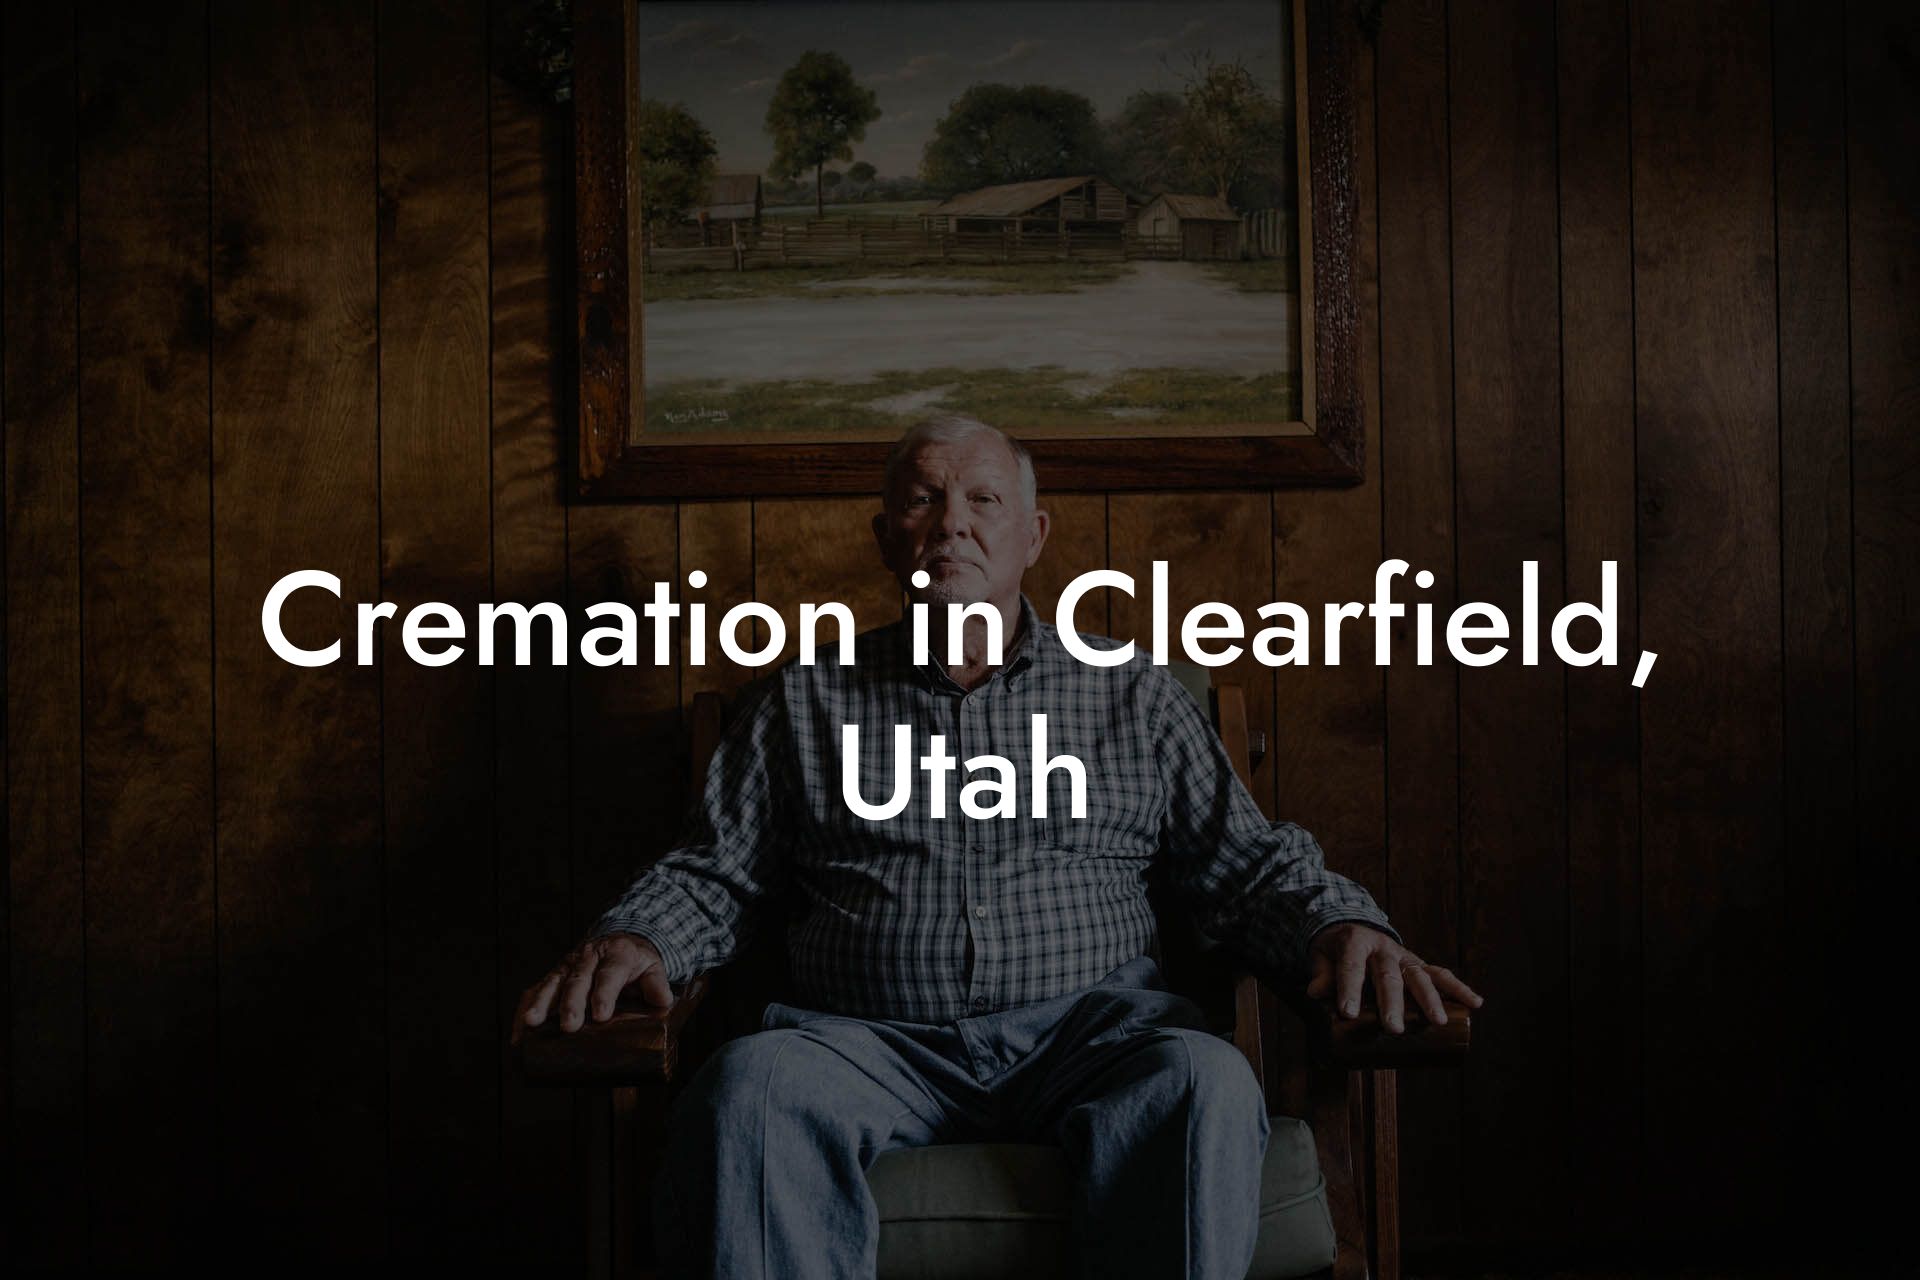 Cremation in Clearfield, Utah